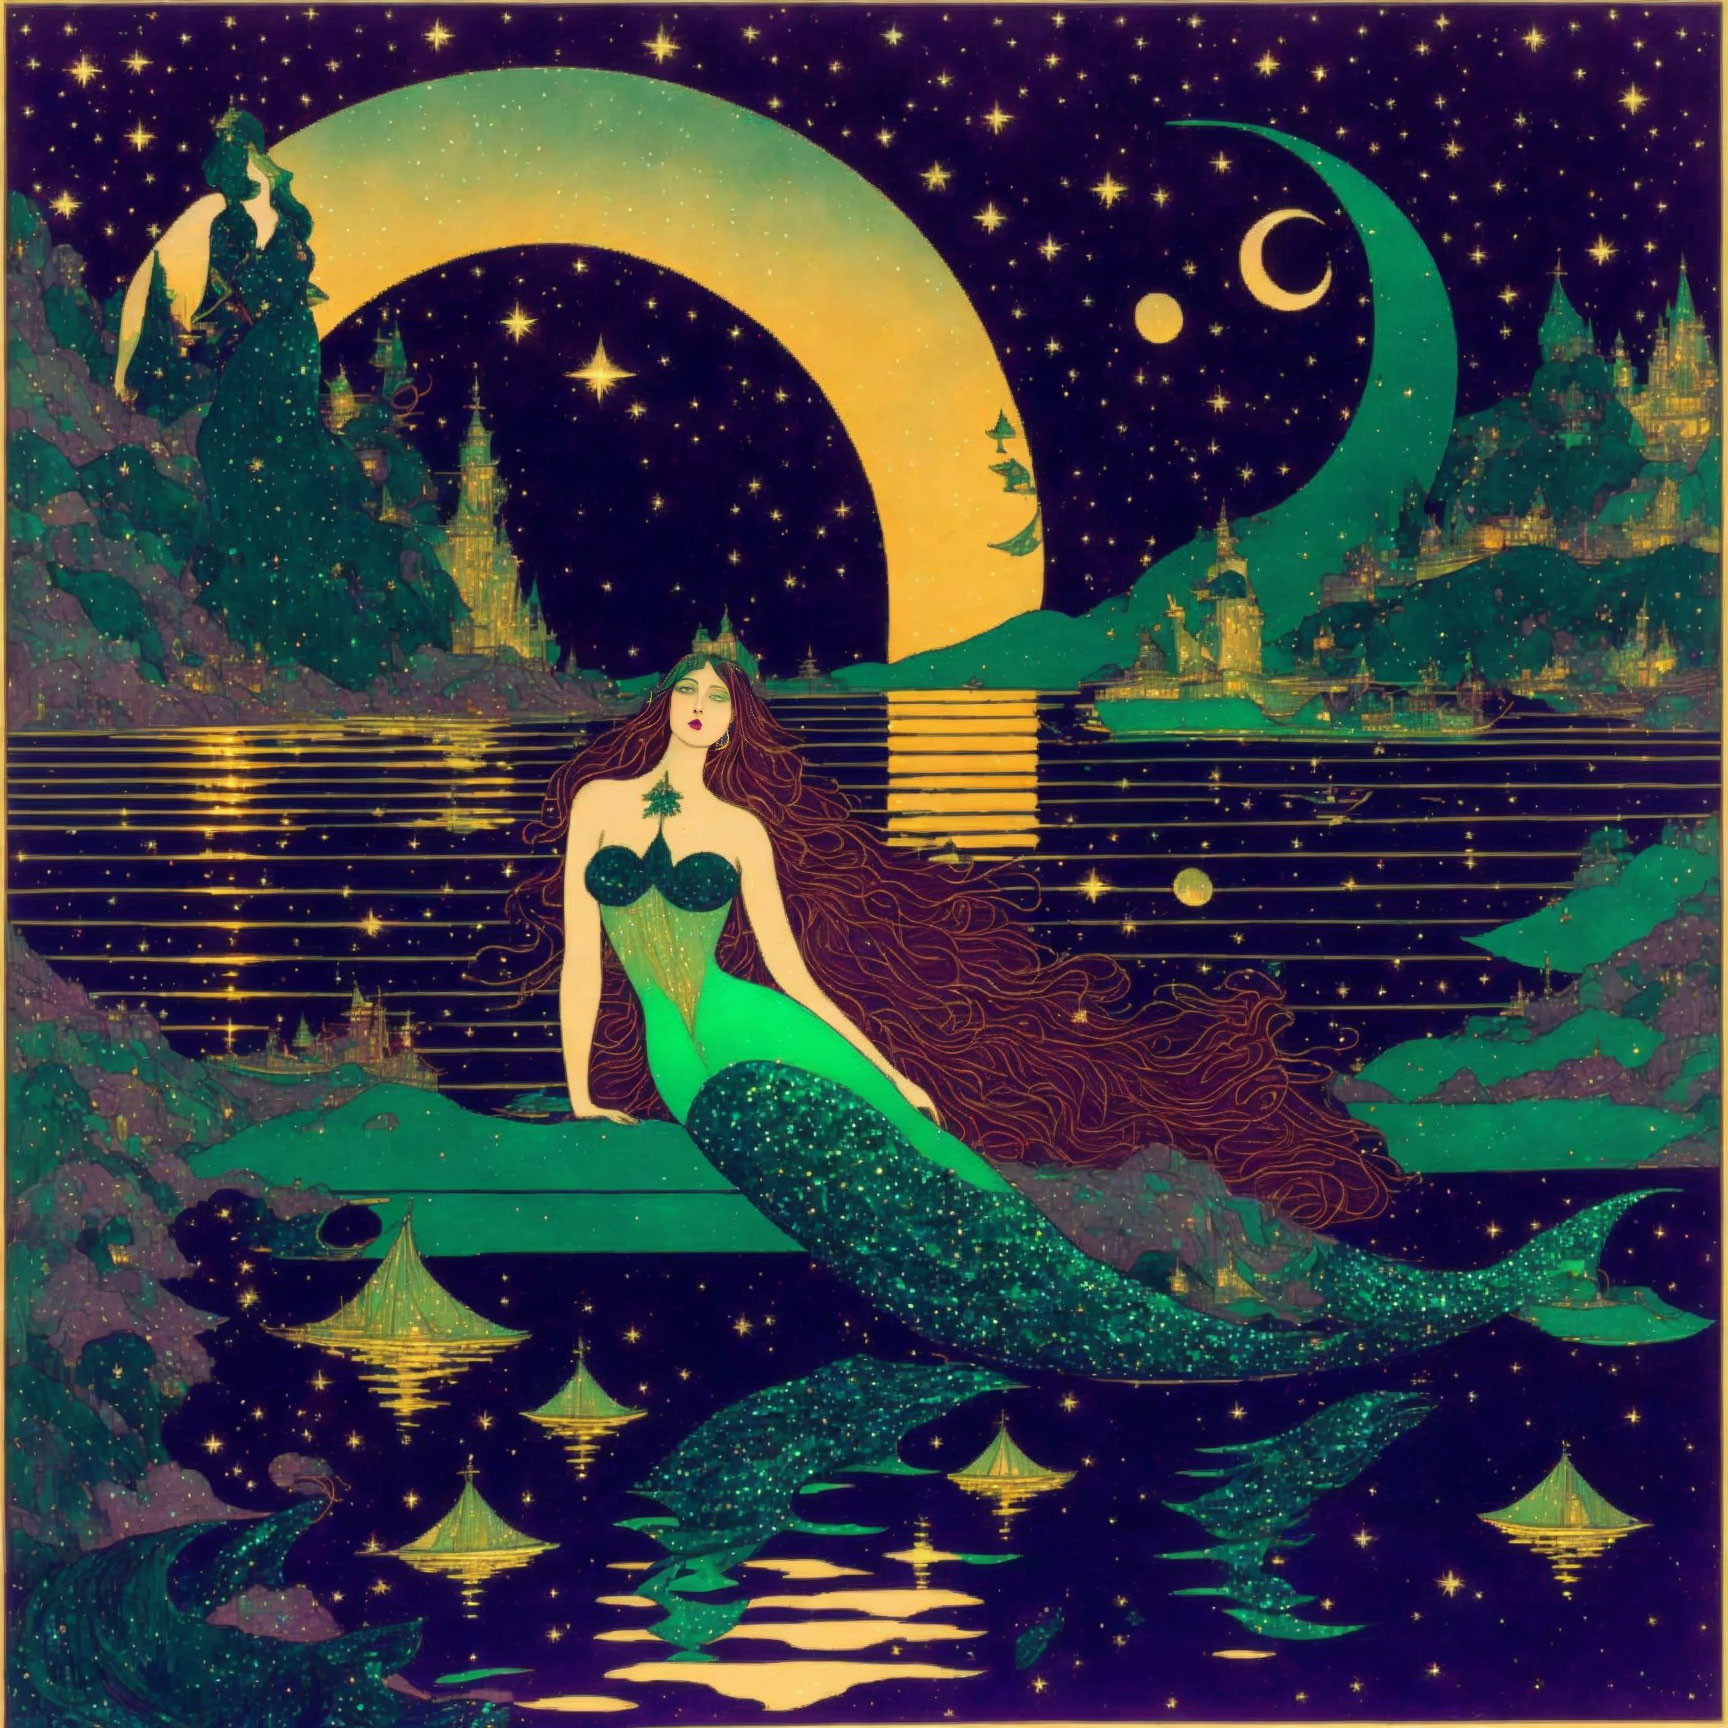 Mermaid illustration with long hair by the sea under crescent moon